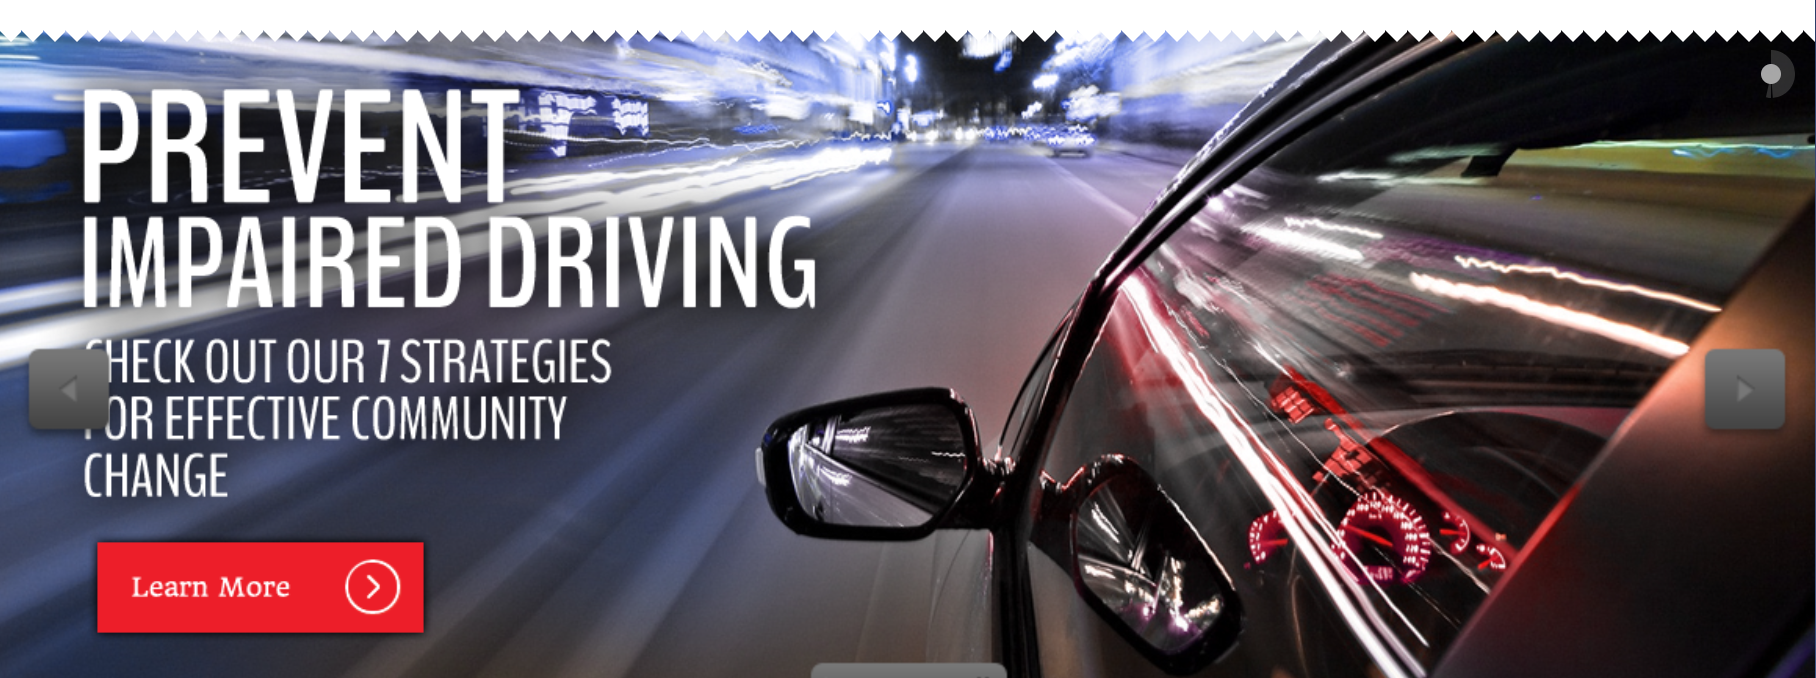 Prevent Impaired Driving